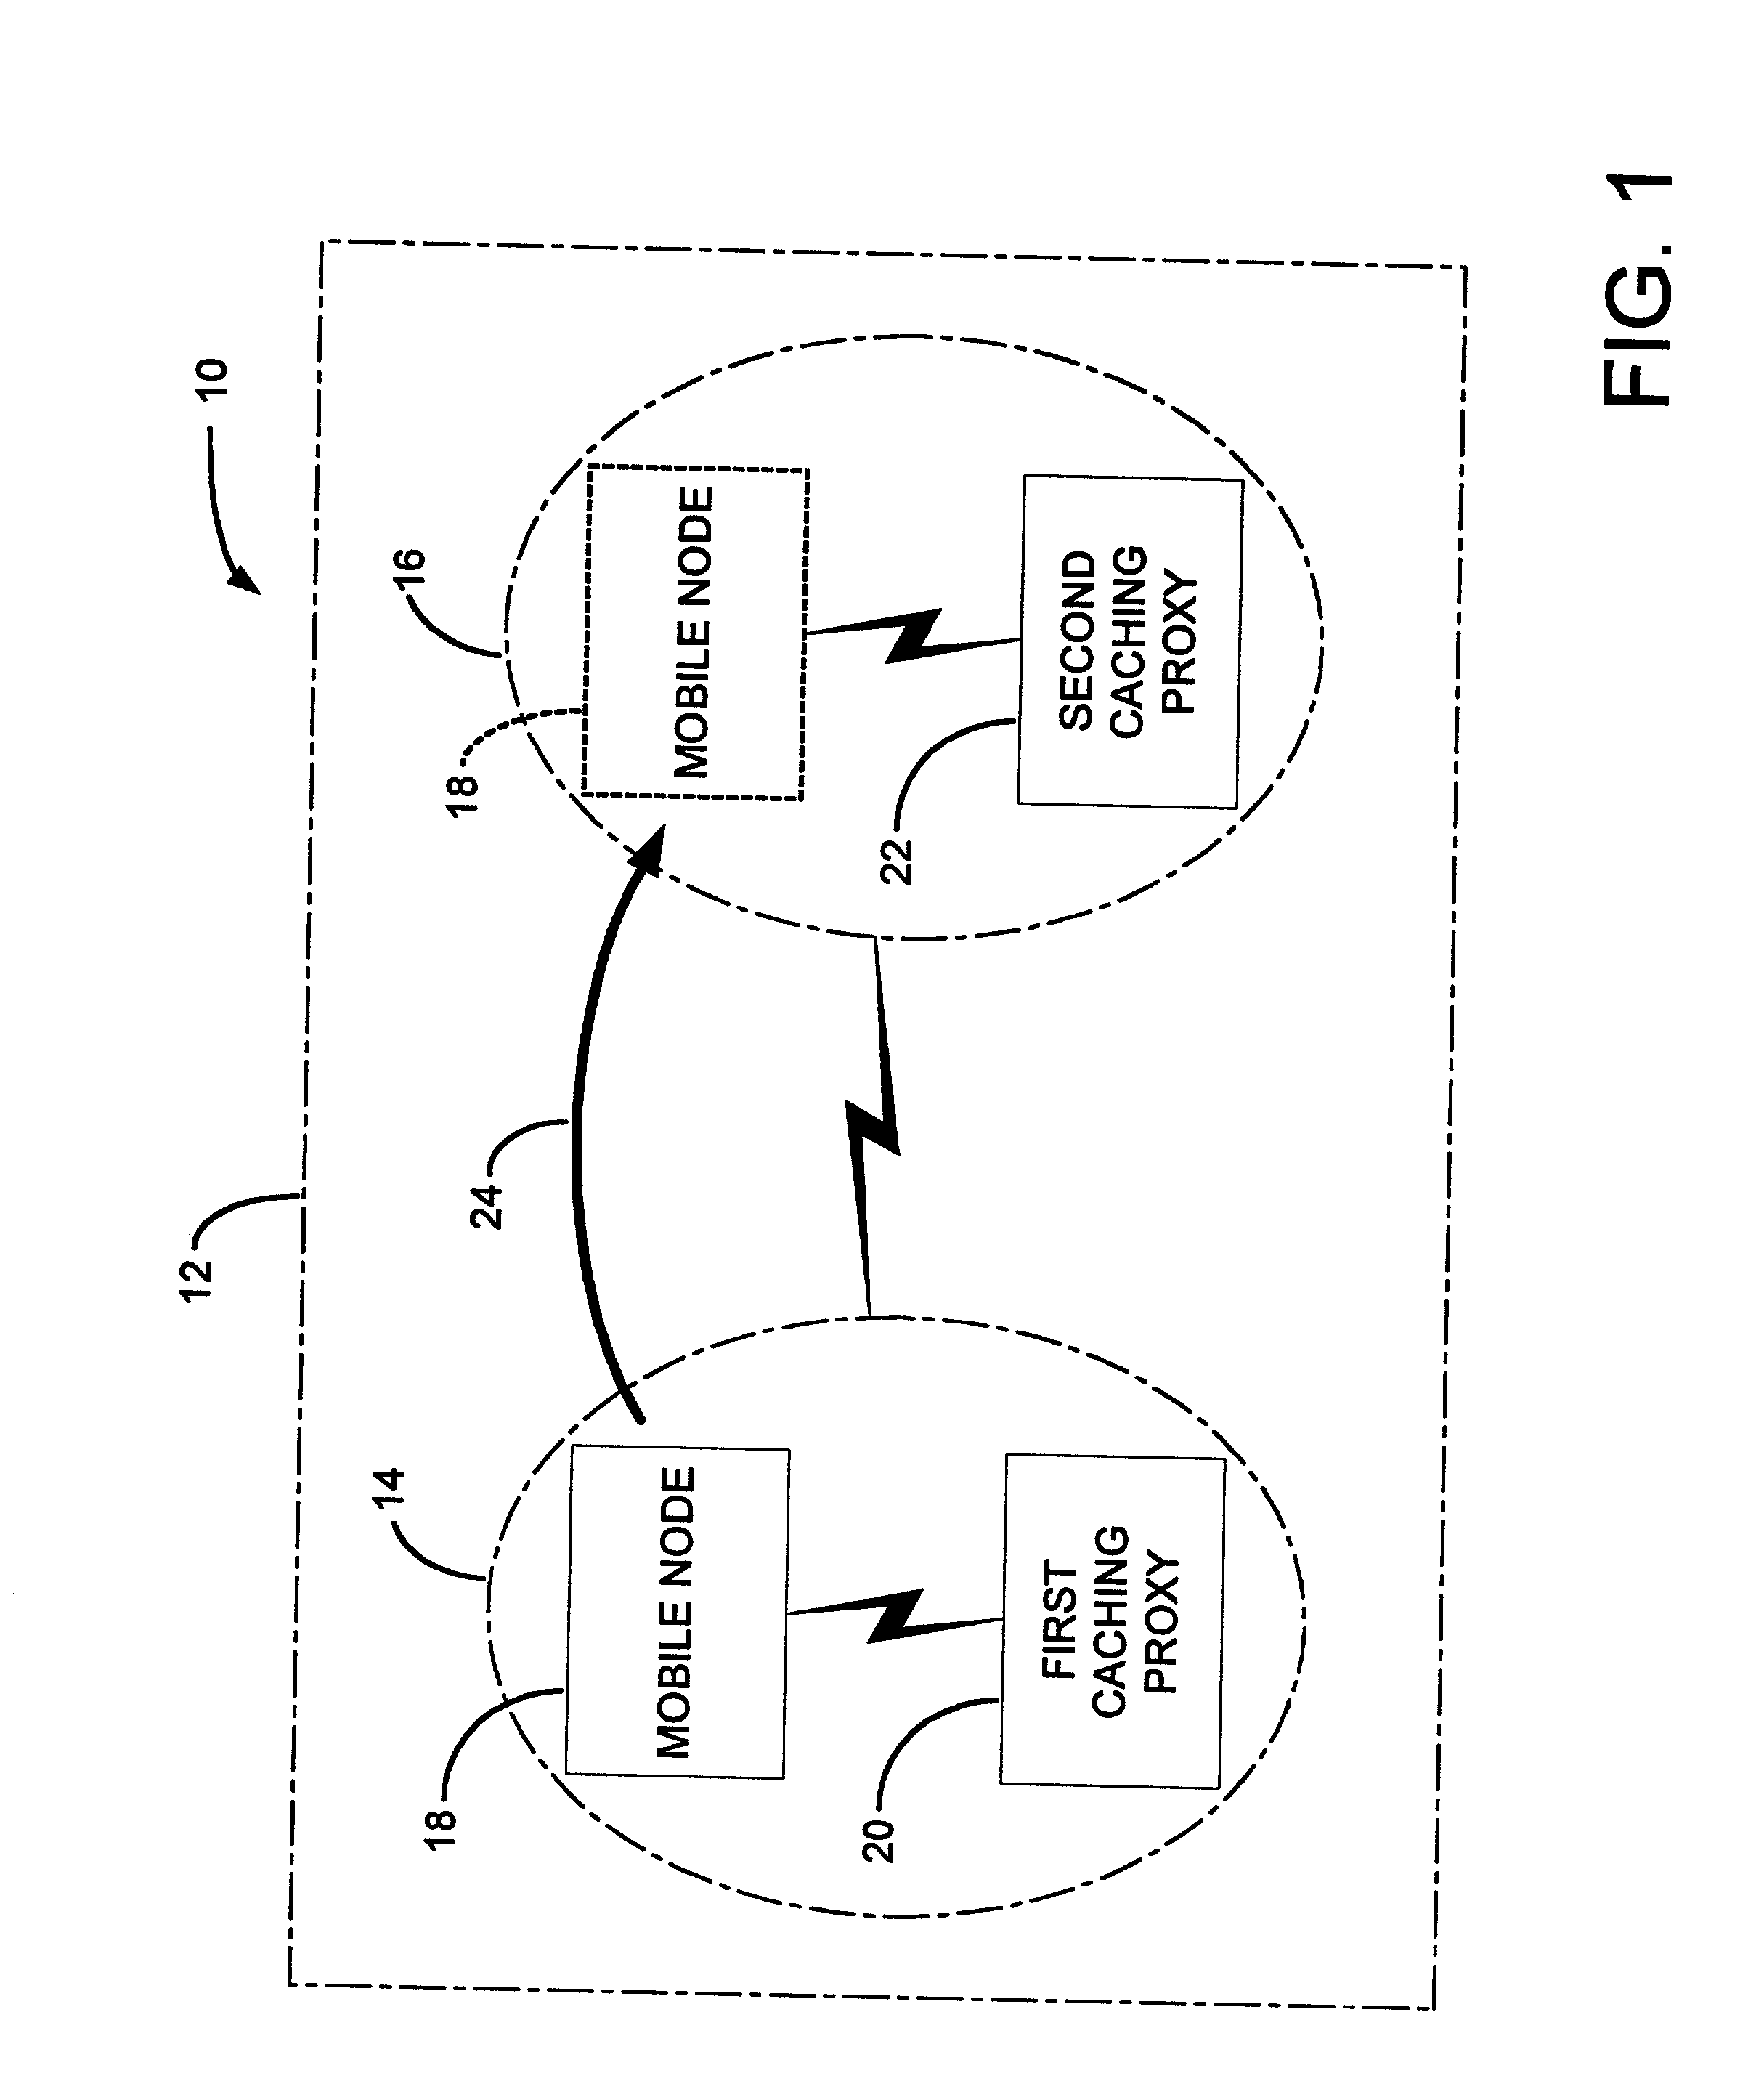 System for management of cacheable streaming content in a packet based communication network with mobile hosts